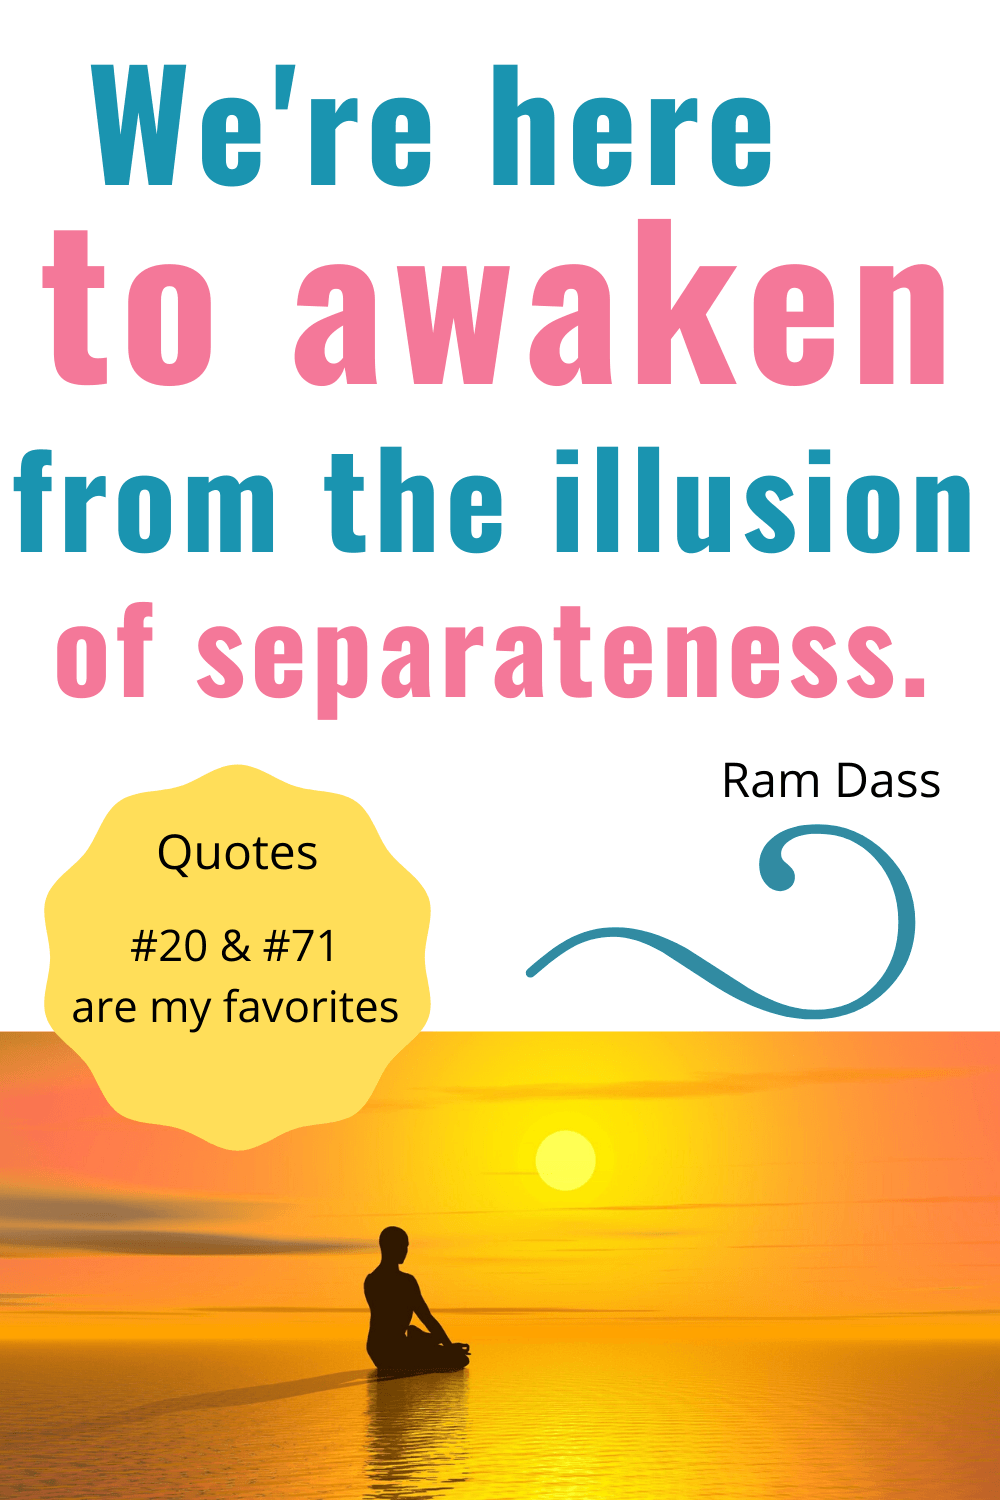 we are here to awaken from the illusion of separateness